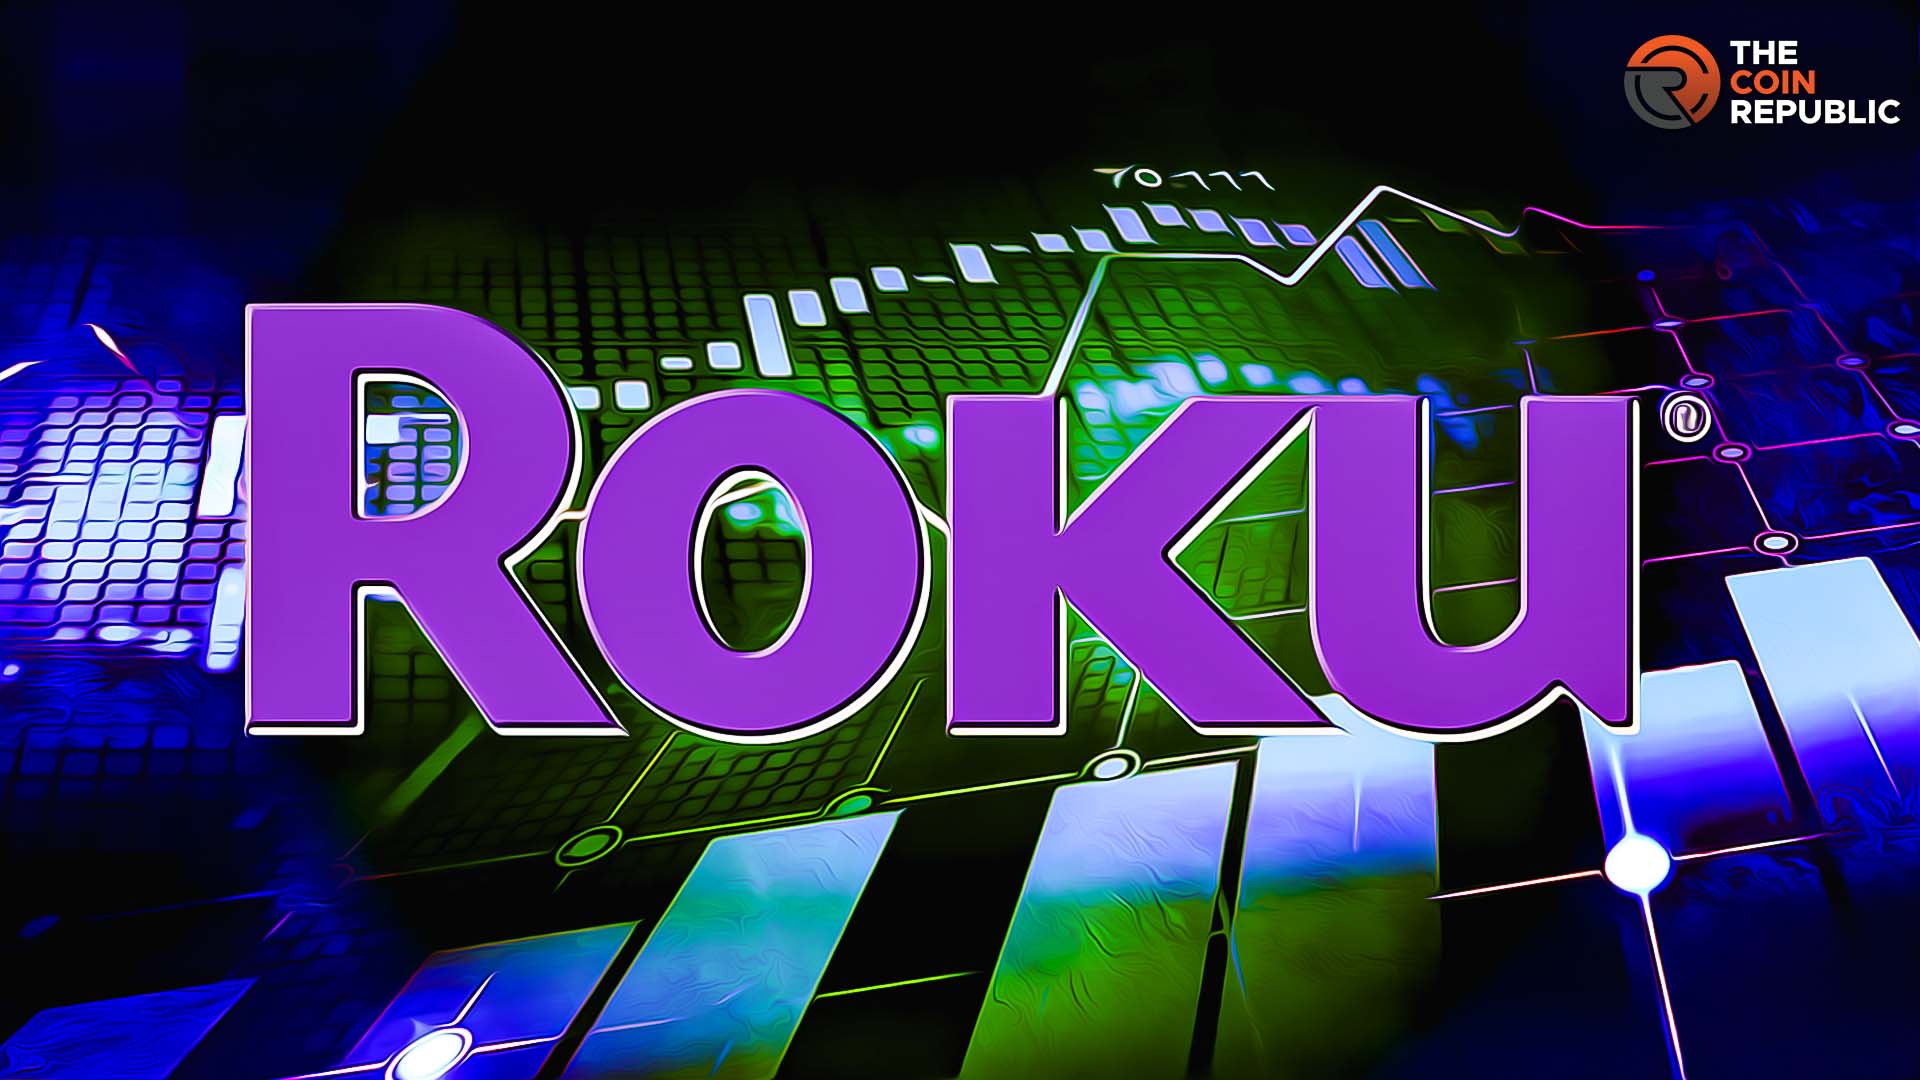 Roku Inc. (ROKU Stock) – Is Streaming to a New High Possible?